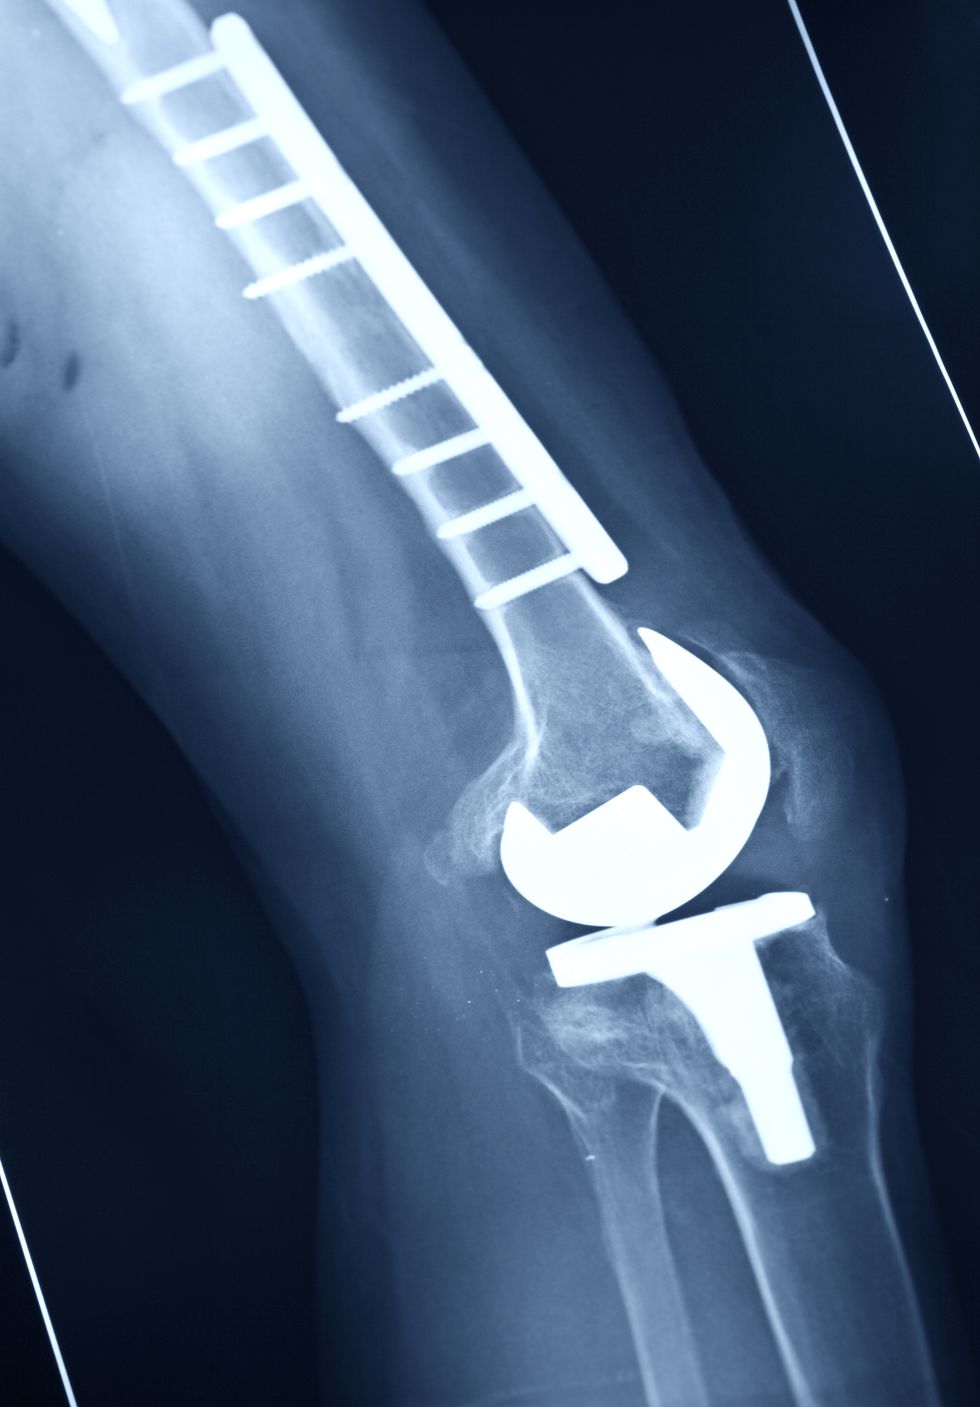 Digital x-ray following successful knee replacement surgery